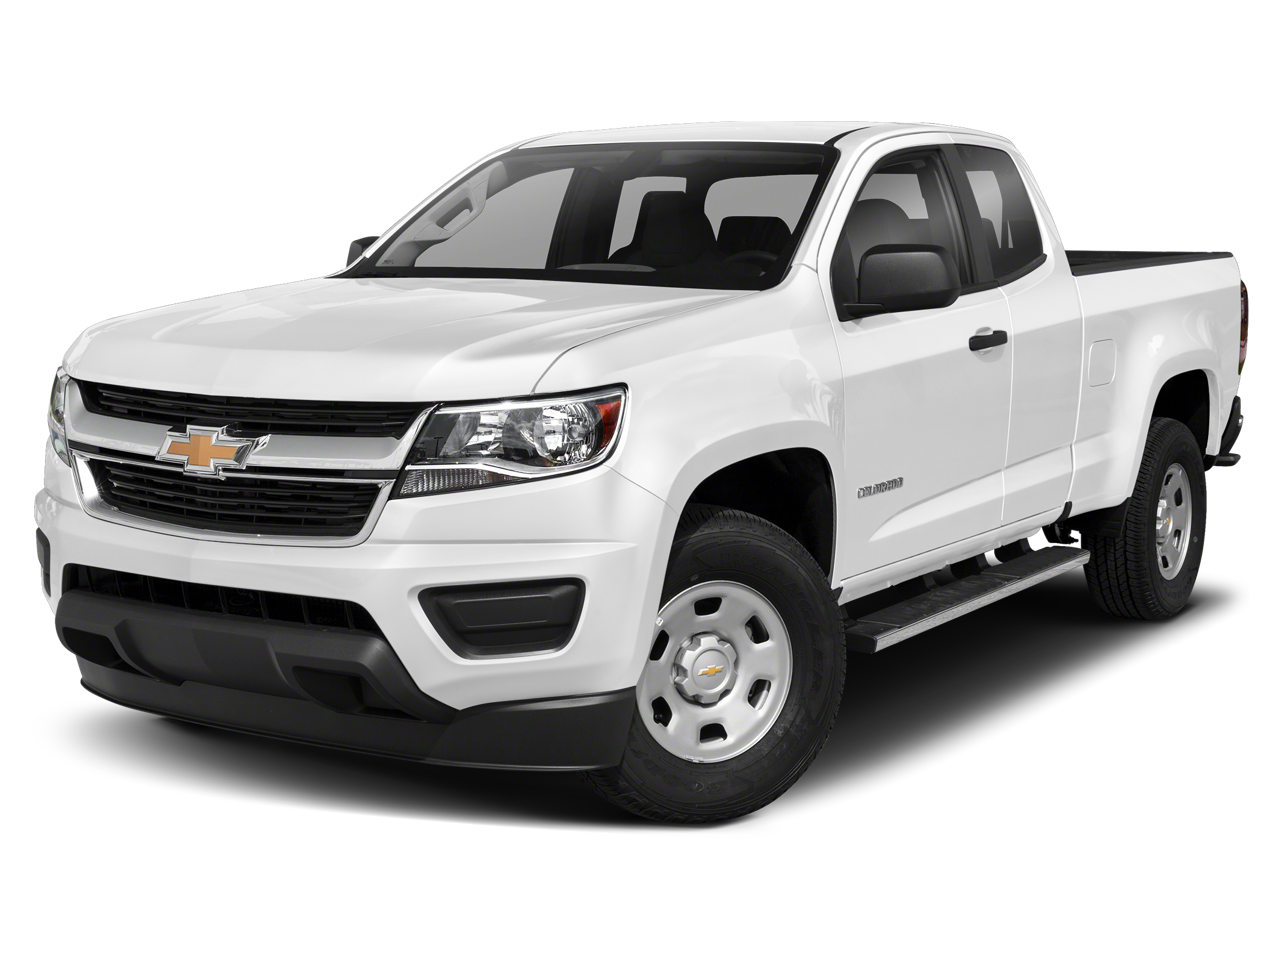 2019 Chevrolet Colorado Work Truck EXT. CAB APPLE CARPLAY ONSTAR EQUIPPED